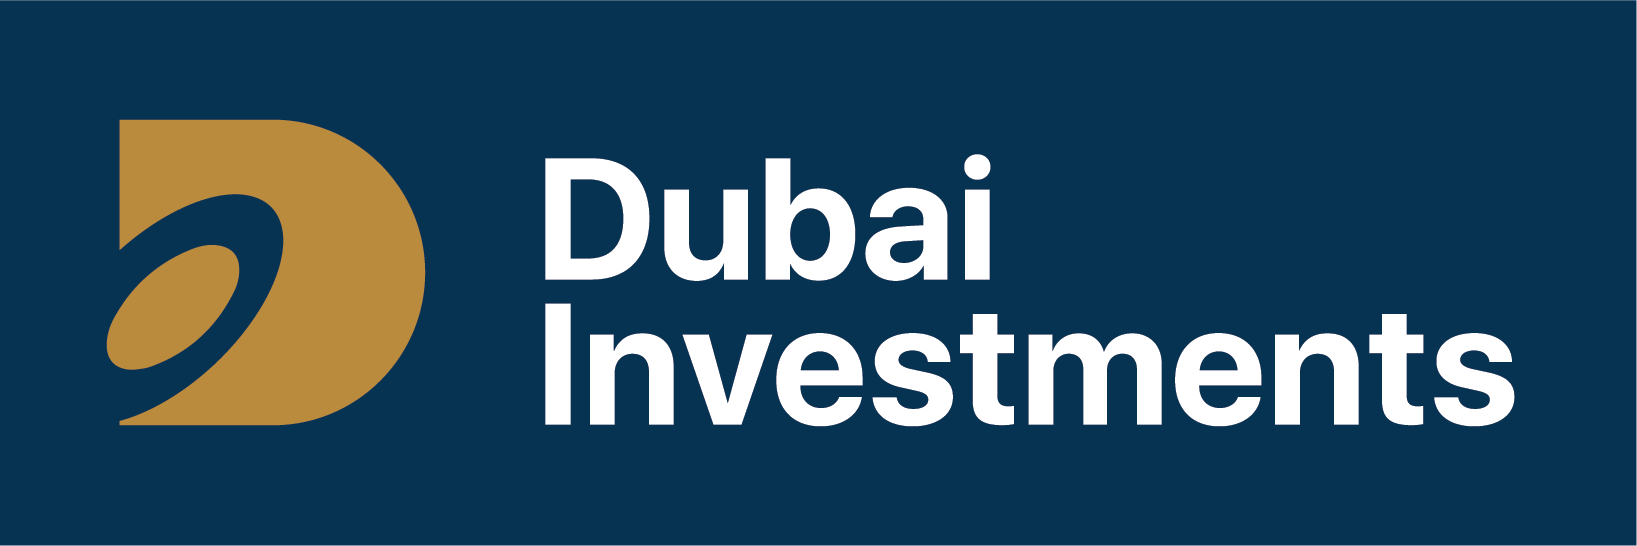 Image for Dubai Investments E-Waste Initiative Collects More Than 250kg Of Electronic Waste